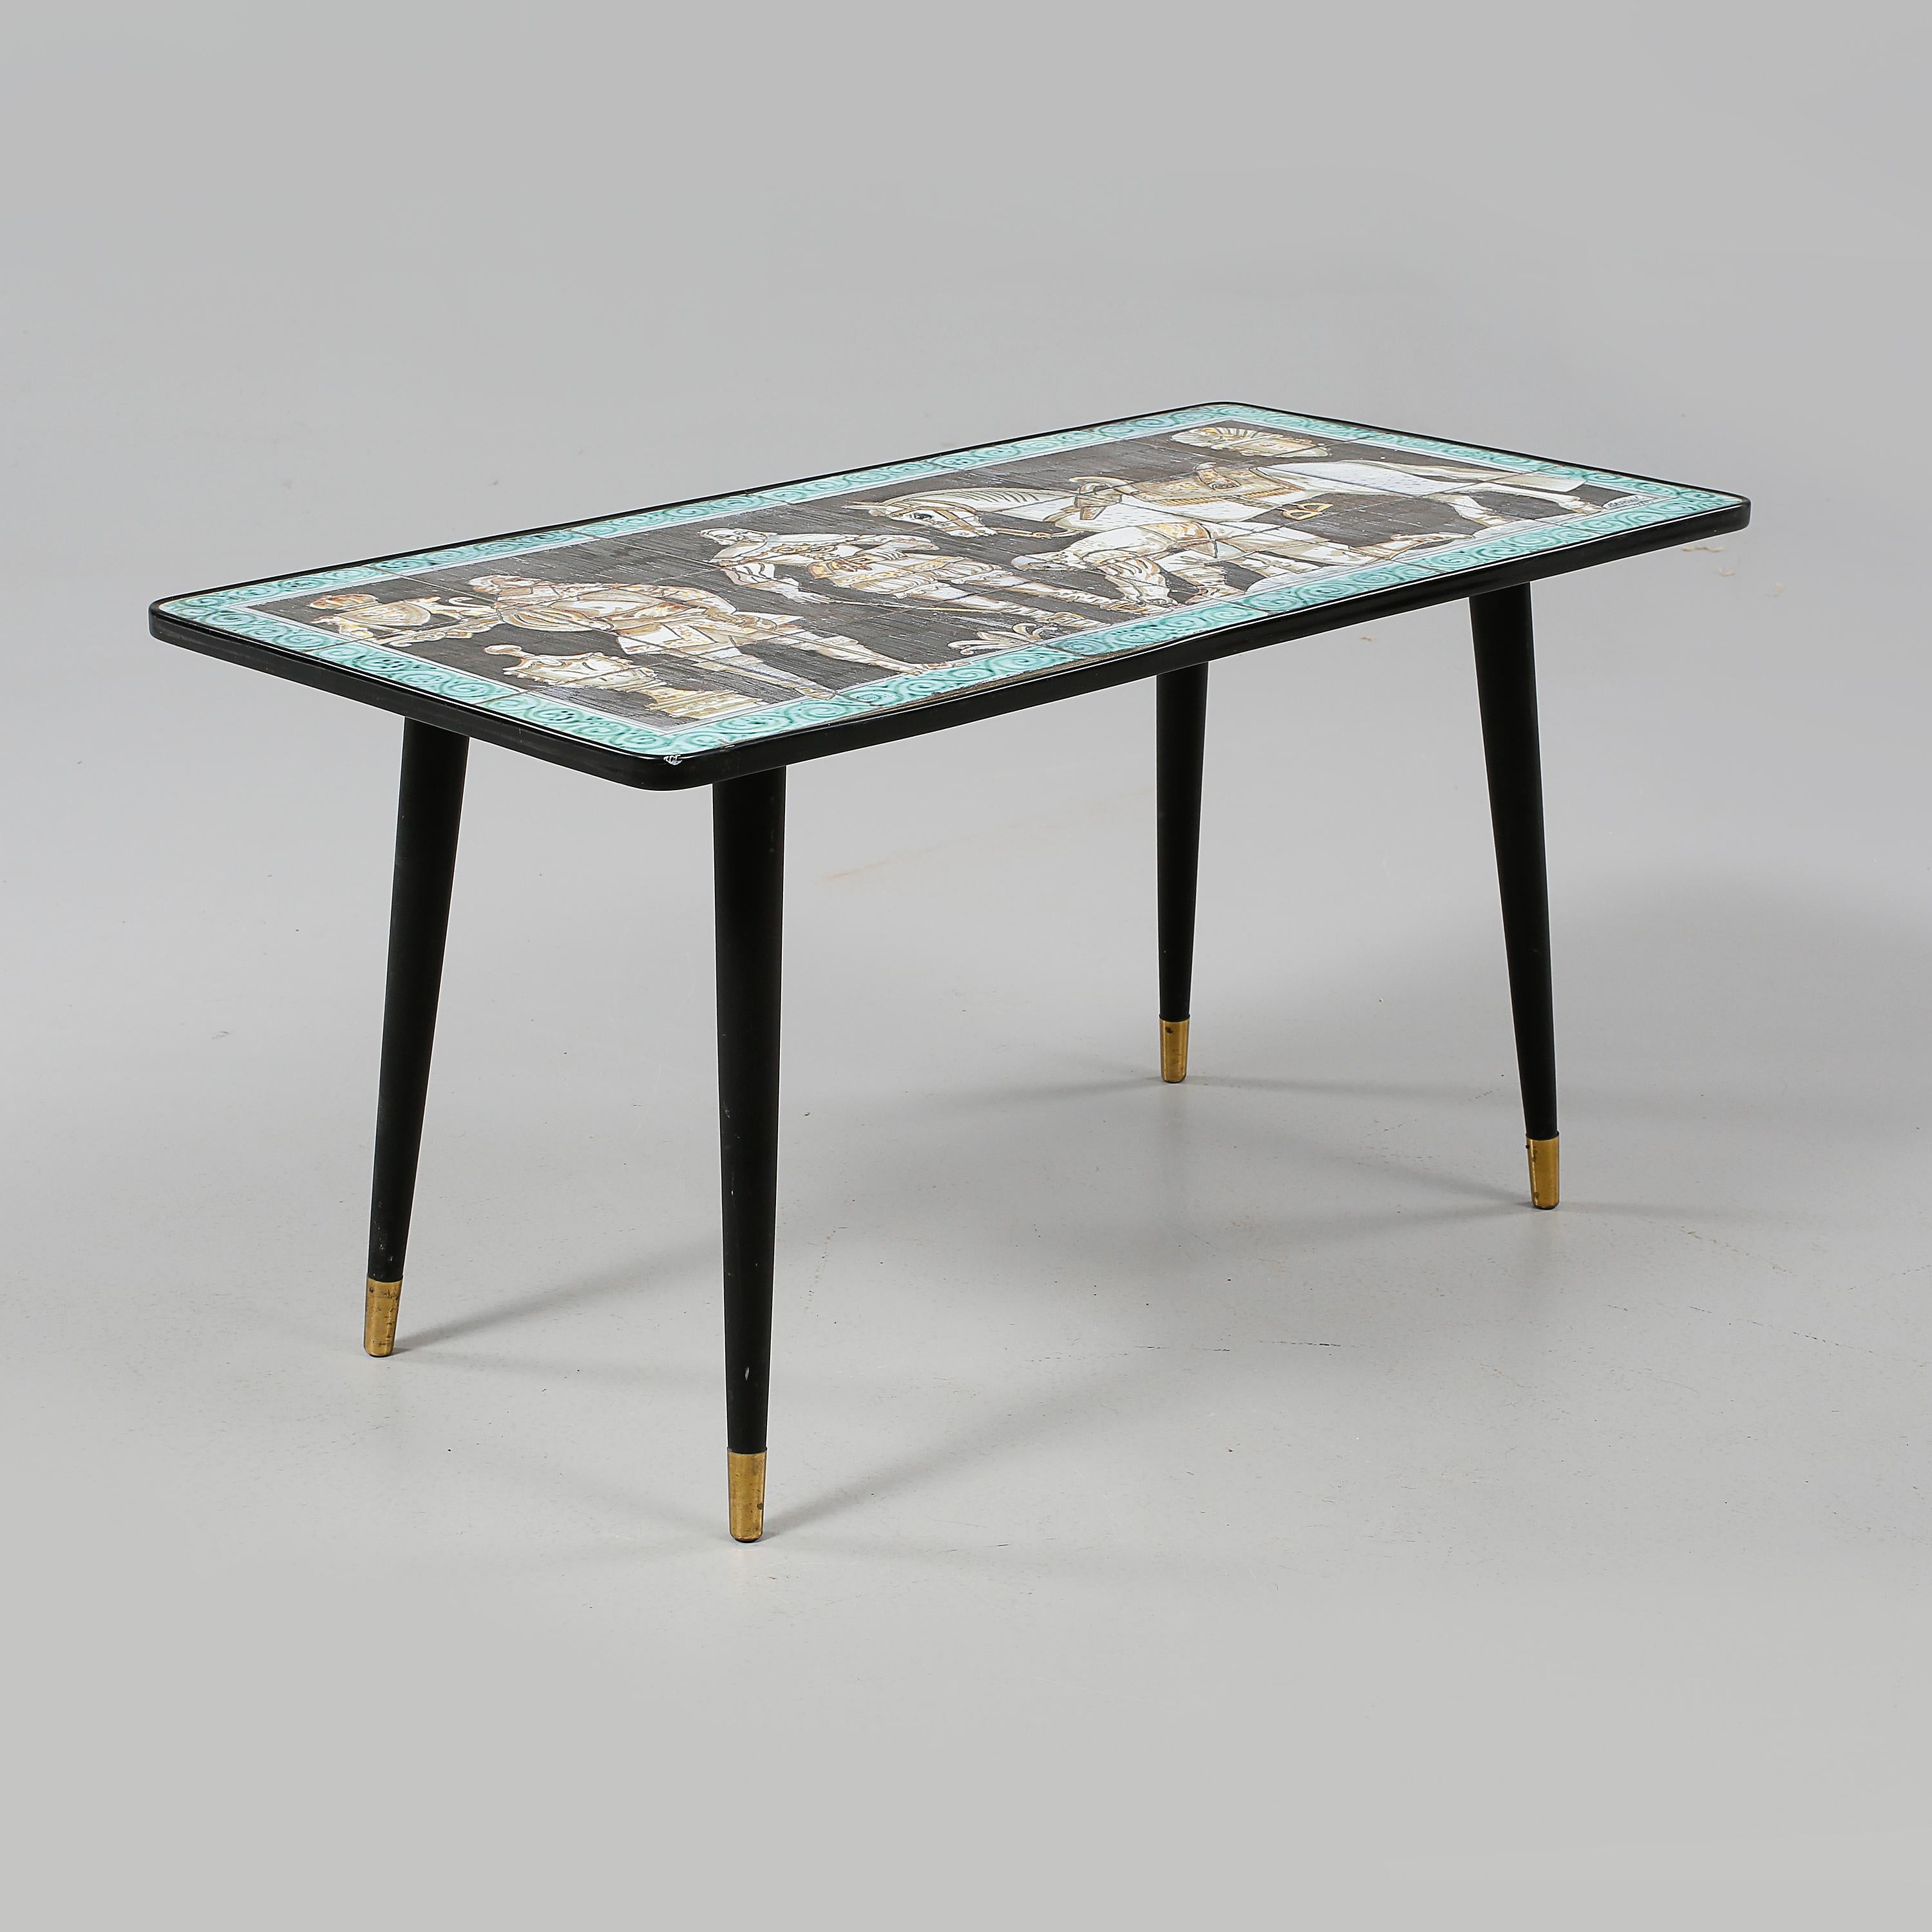 20th Century Tilgmans table by Marian Zawadzki  Sweden Signed and dated 1960 For Sale